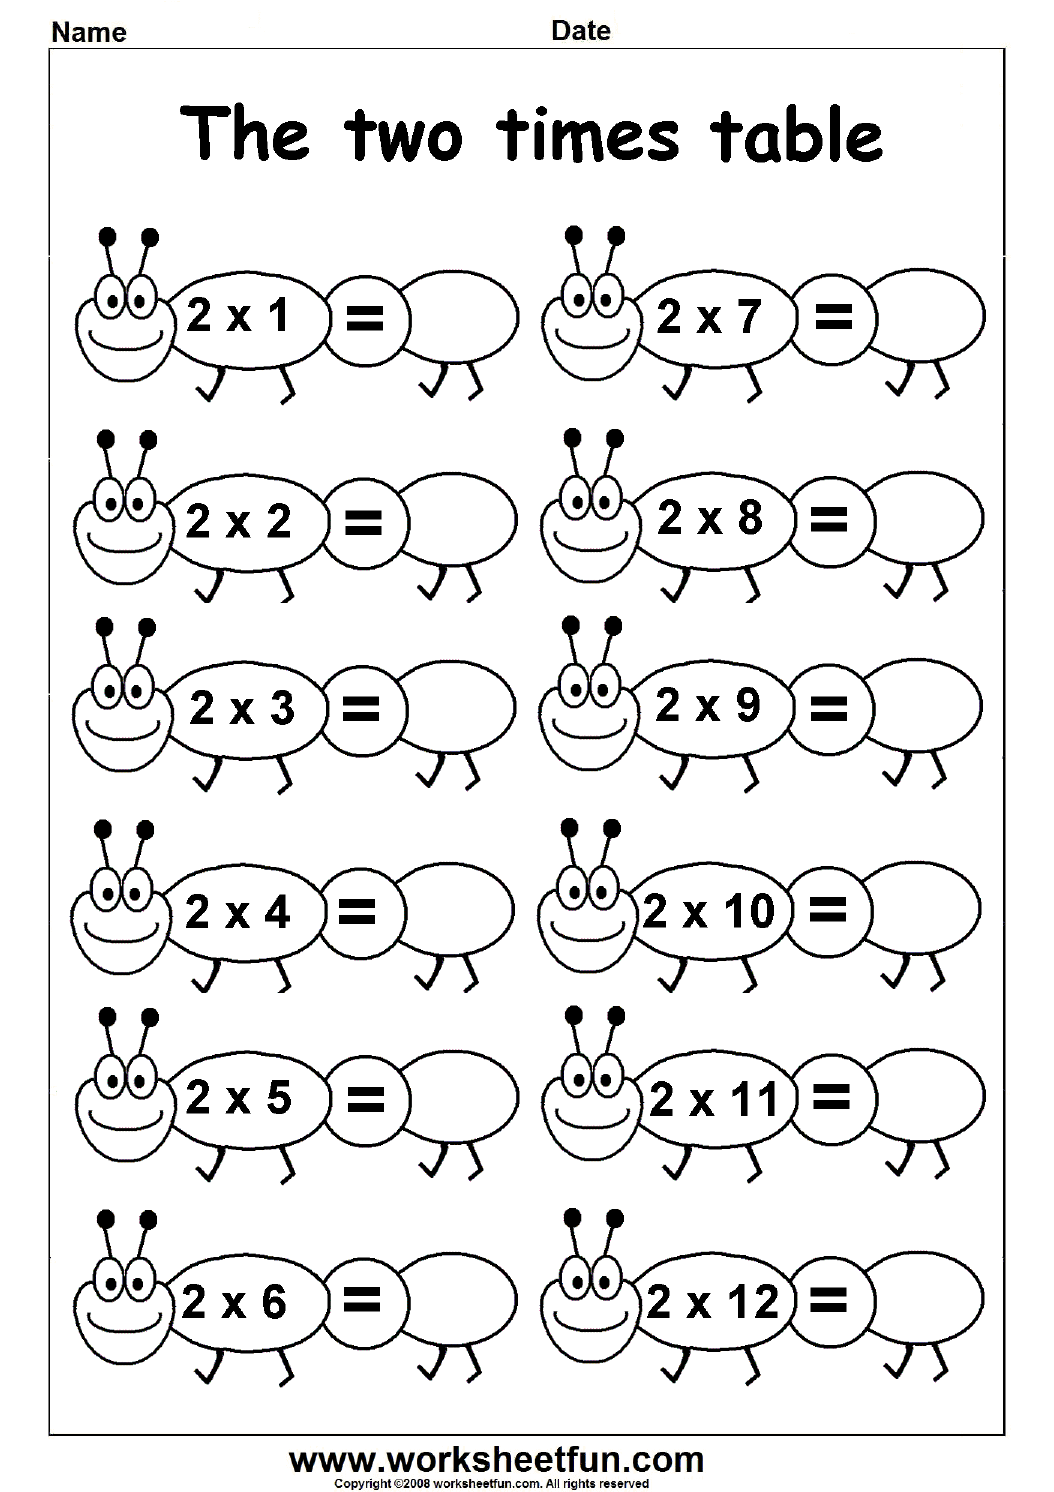 Multiplication Times Tables Worksheets 2 3 4 5 6 7 Times Tables Six Worksheets FREE Printable Worksheets Worksheetfun